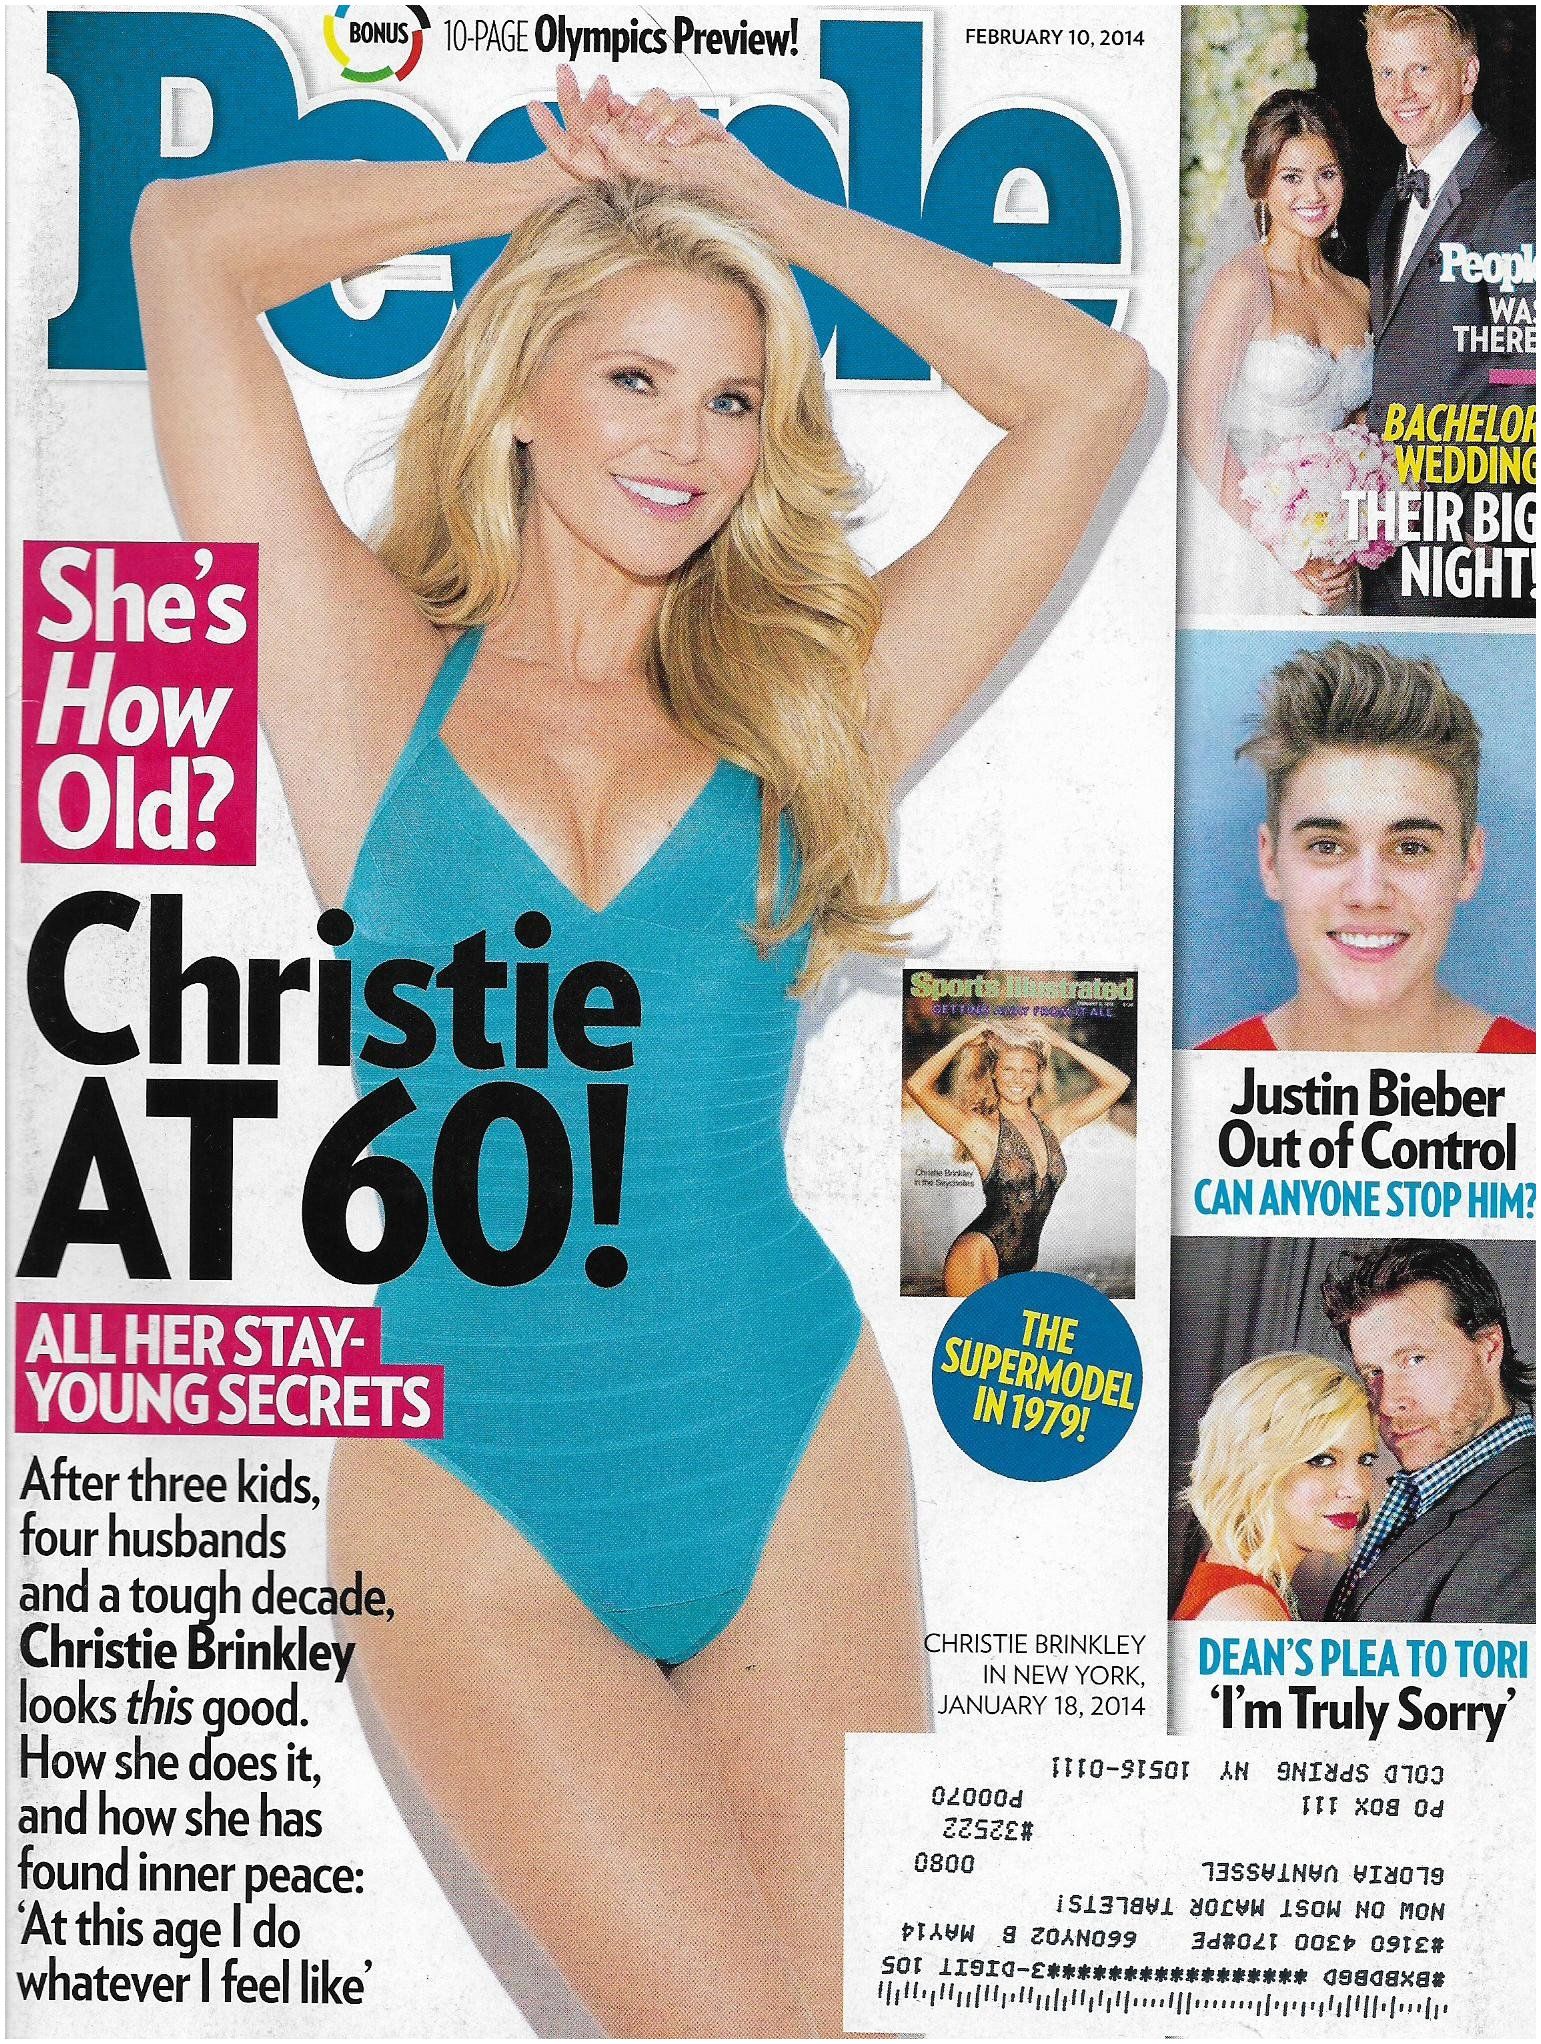 Renew People Magazine Subscription People Magazine February 10 2014 Christie Brinkley Cover Time